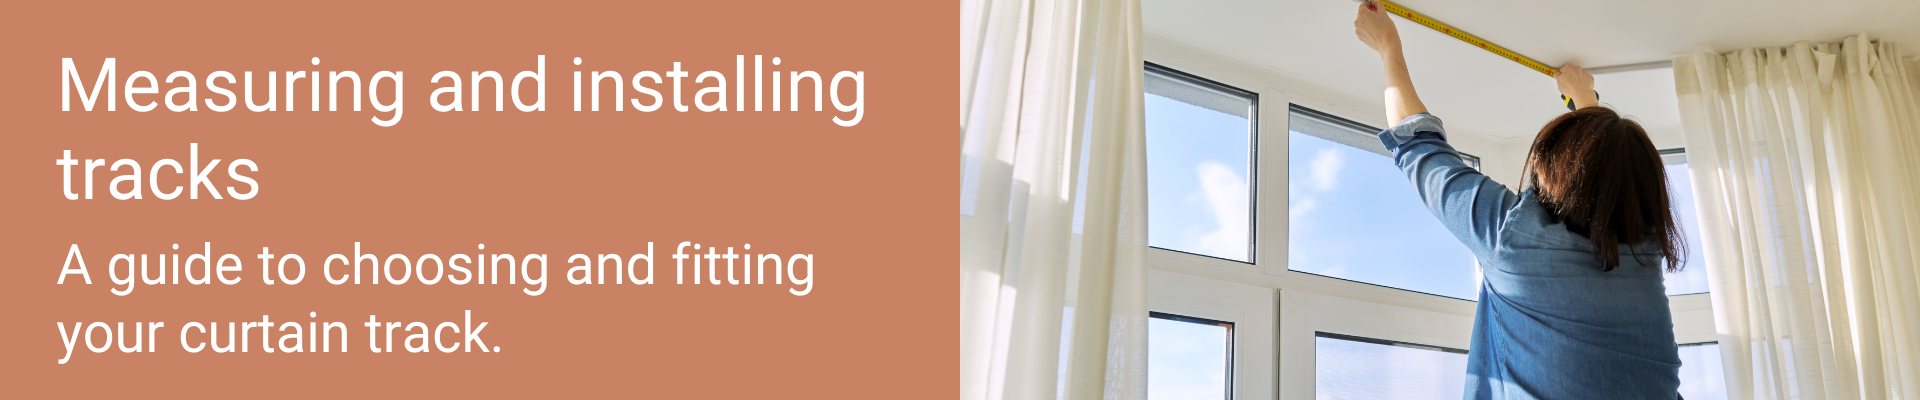 guides to measuring and fitting curtain tracks